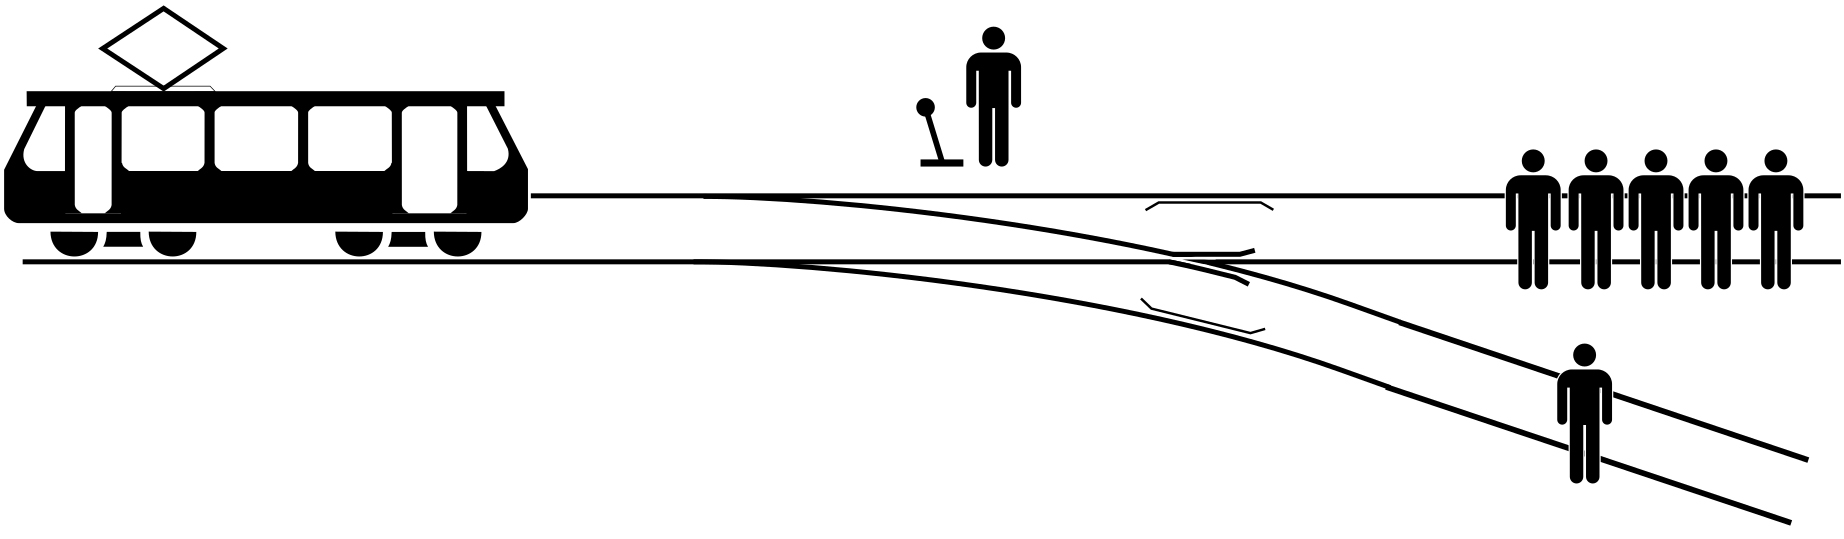 &lt;strong&gt;Figure 1.&lt;/strong&gt; Illustration of the famed trolley problem, which depicts an ethical quandary. Figure courtesy of &lt;a href=&quot;https://en.wikipedia.org/wiki/Trolley_problem#/media/File:Trolley_Problem.svg&quot;&gt;McGeddon via Wikimedia Commons &lt;/a&gt; under the &lt;a href=&quot;https://creativecommons.org/licenses/by-sa/4.0/&quot;&gt;Creative Commons Attribution-Sharealike 4.0 International license&lt;/a&gt;.